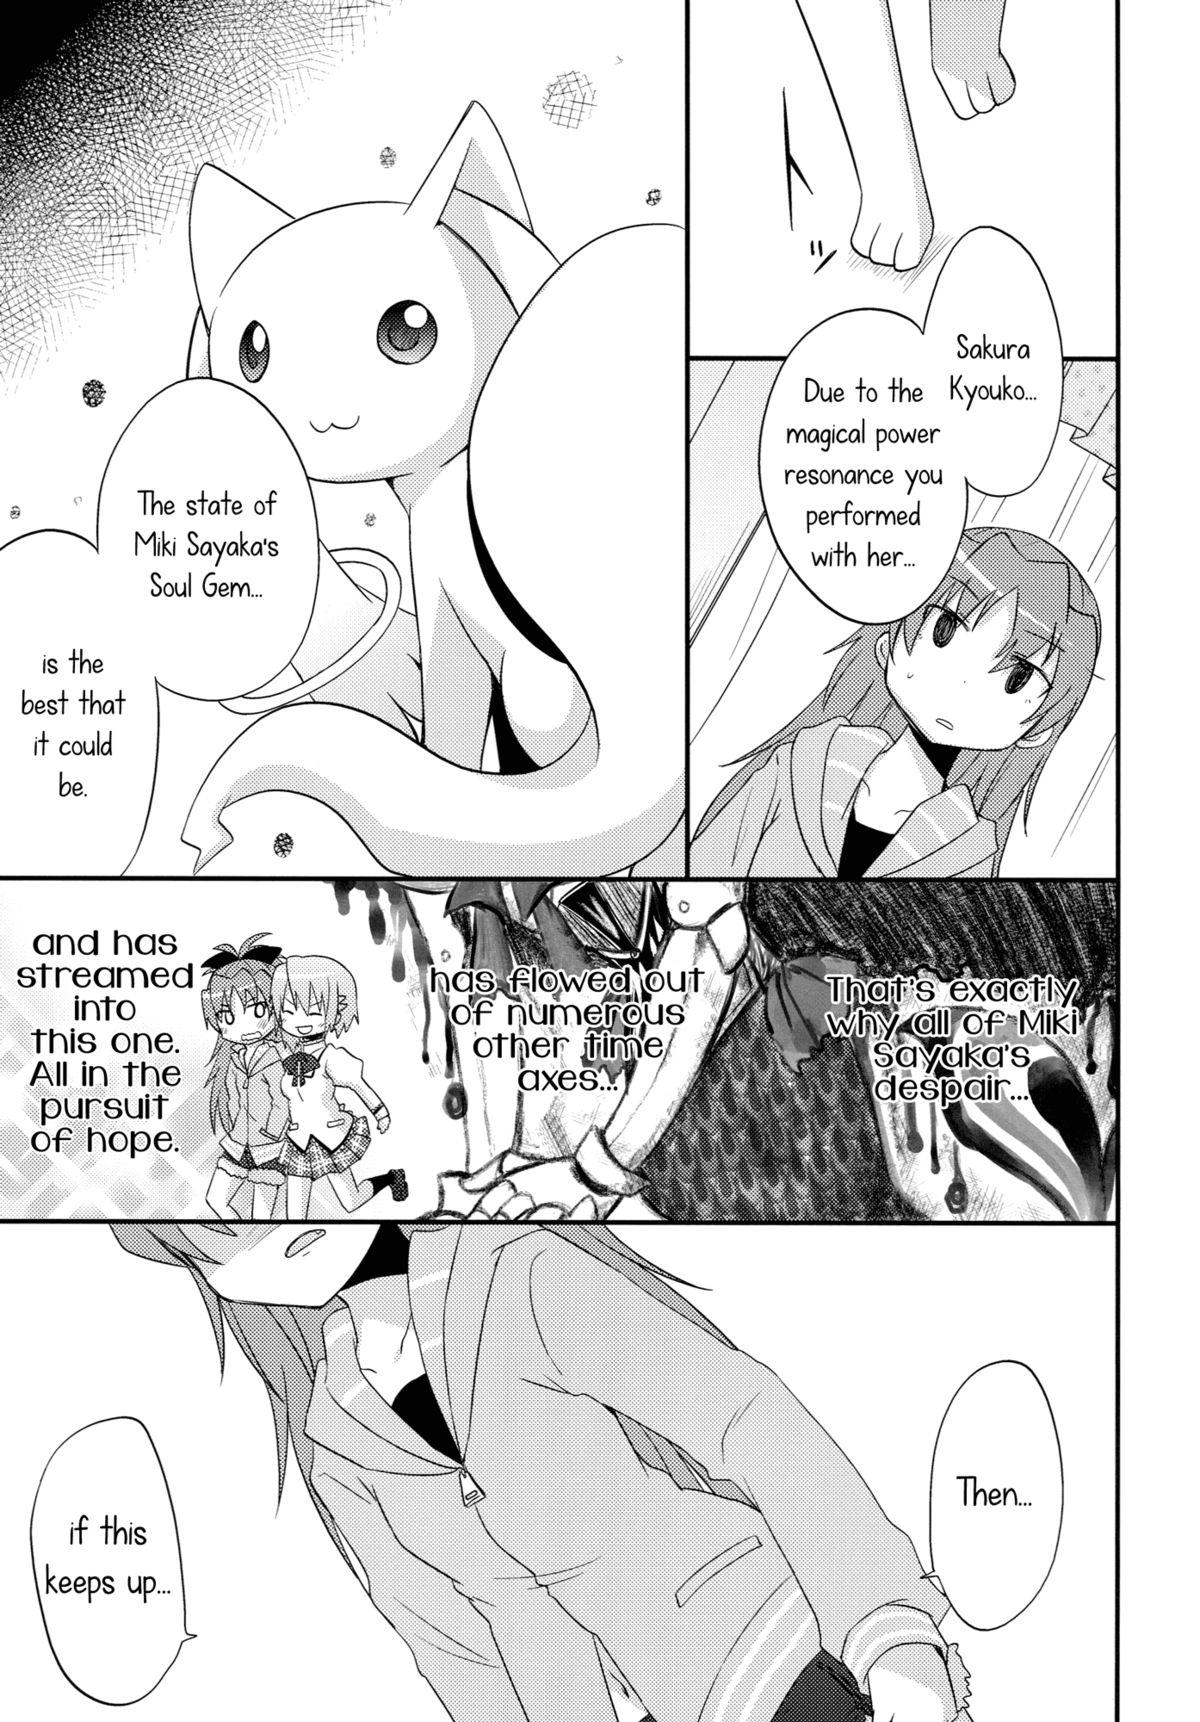 Web Our Courting War Front - Puella magi madoka magica Fucking - Page 10